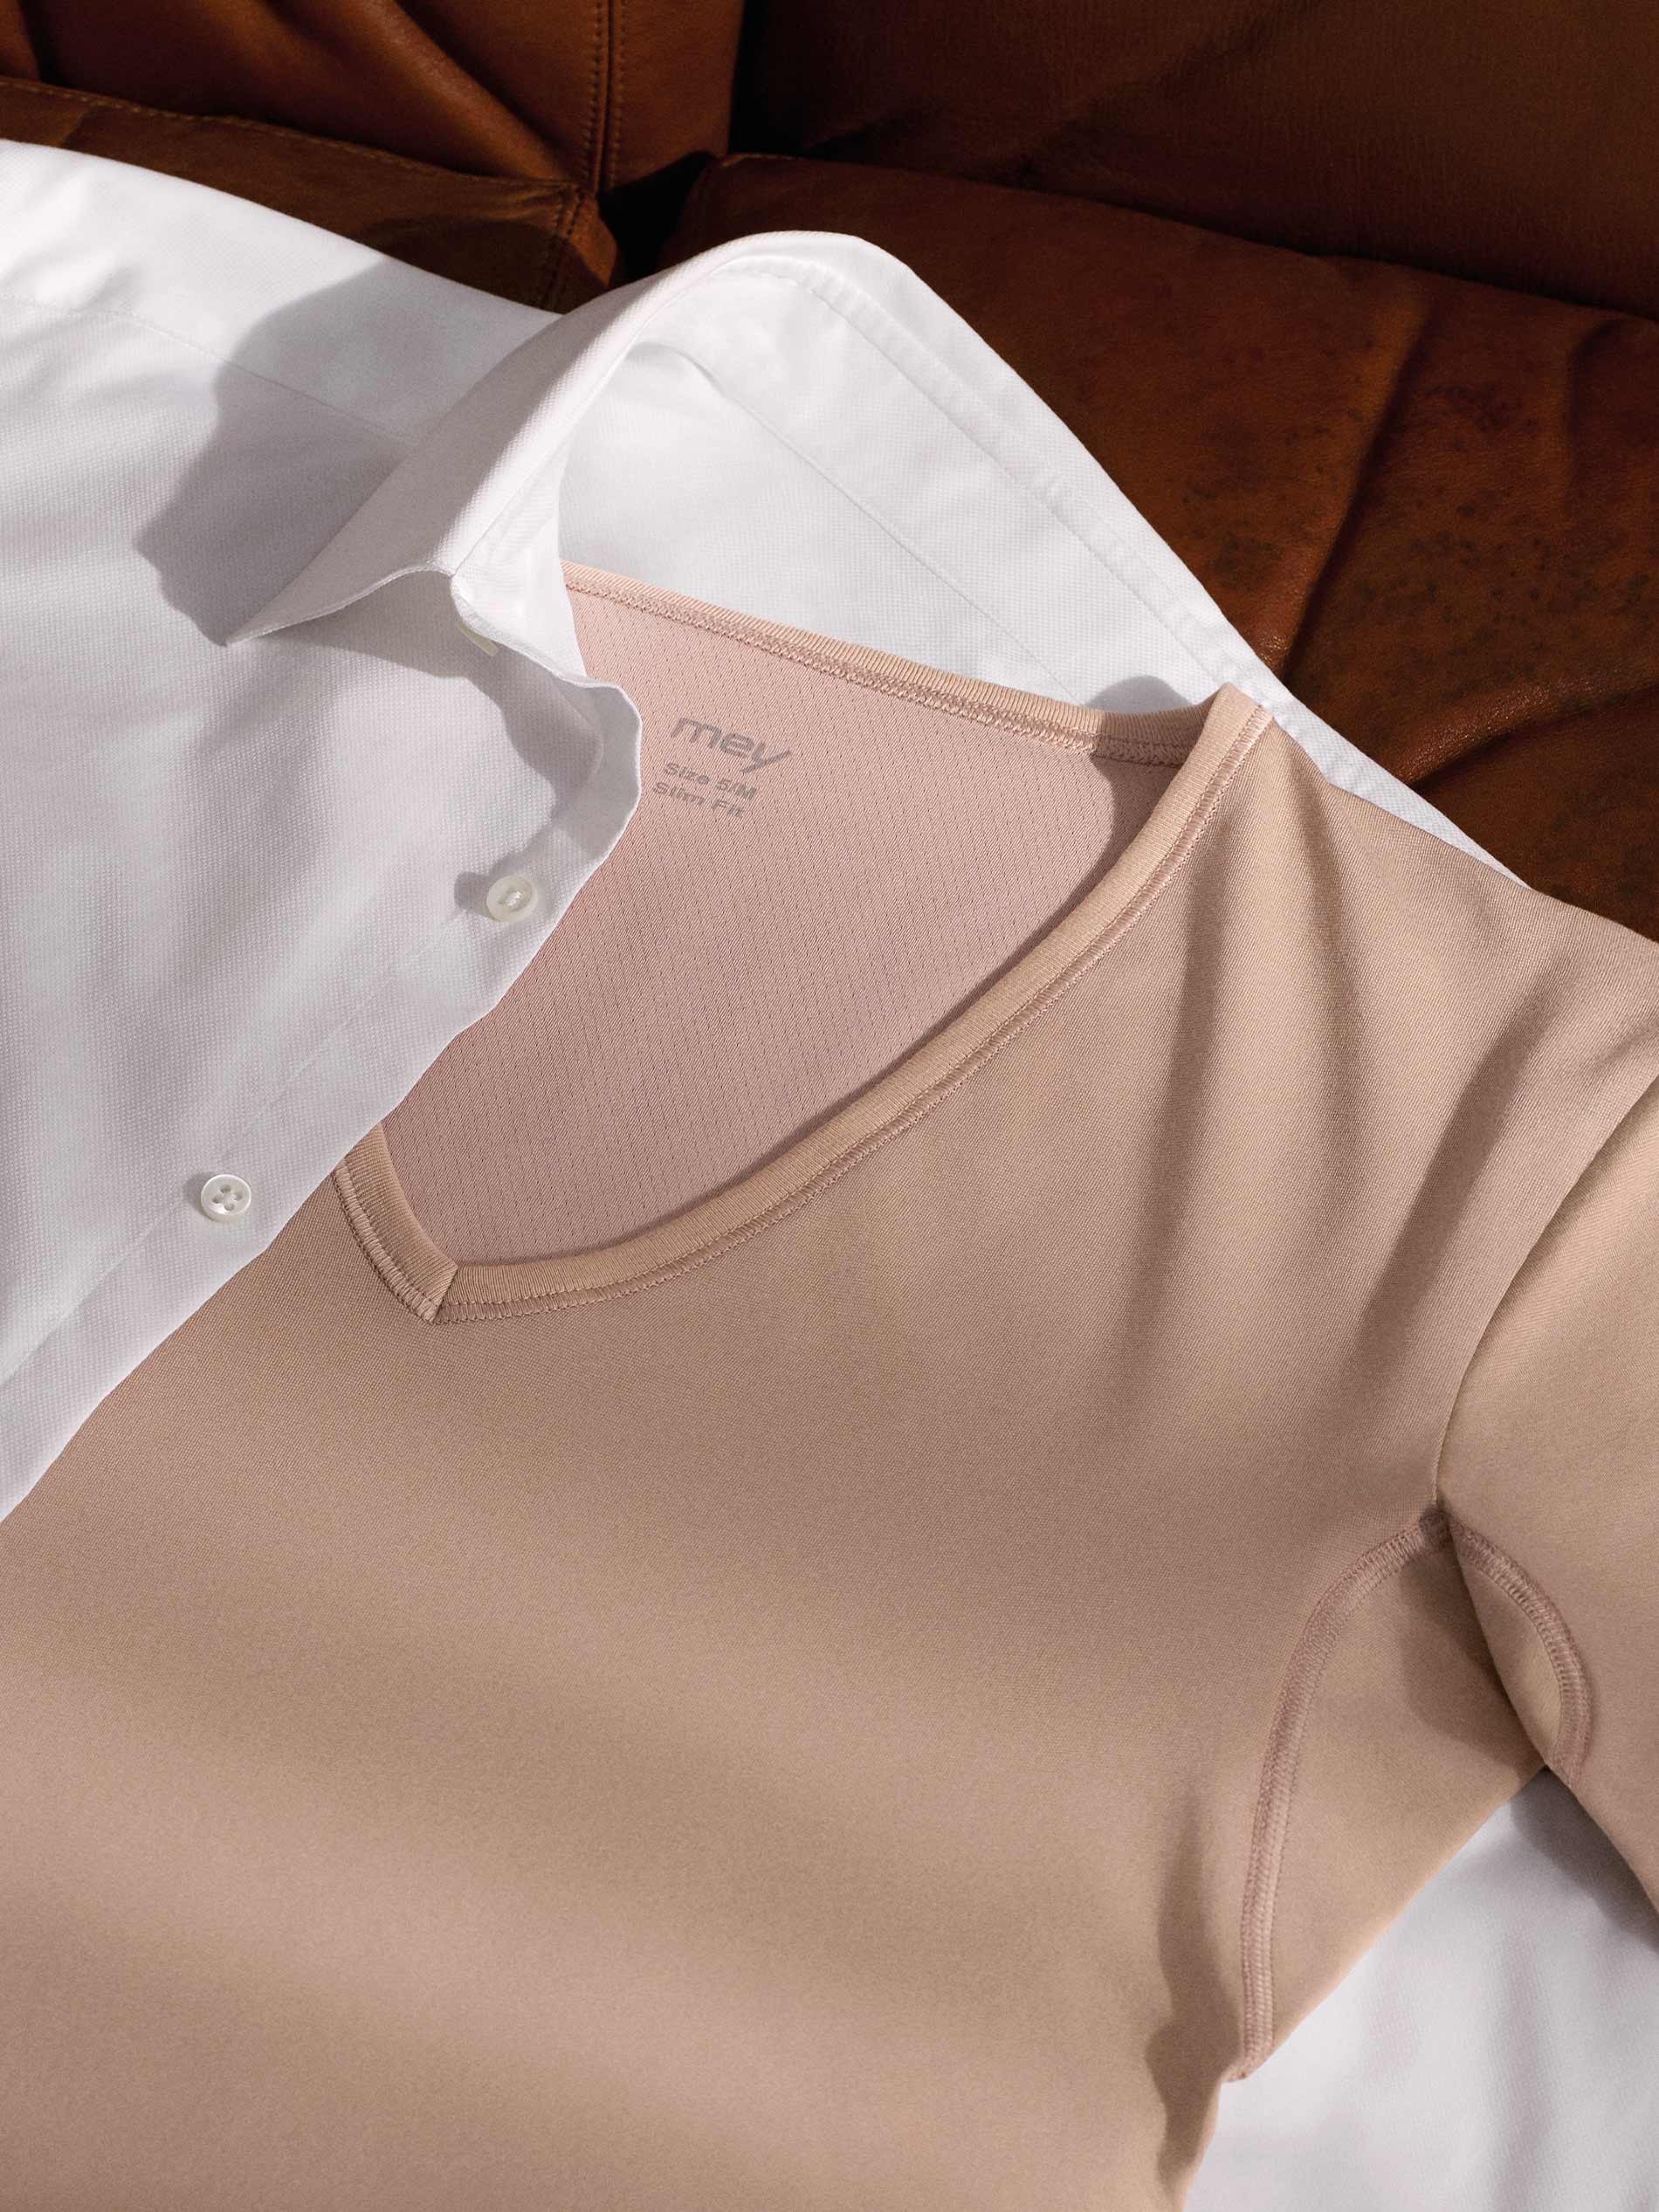 fabric insert with COOLMAX® fibres in the neck of the undershirt in the colour Light Skin is easily concealed by a white shirt. | mey®